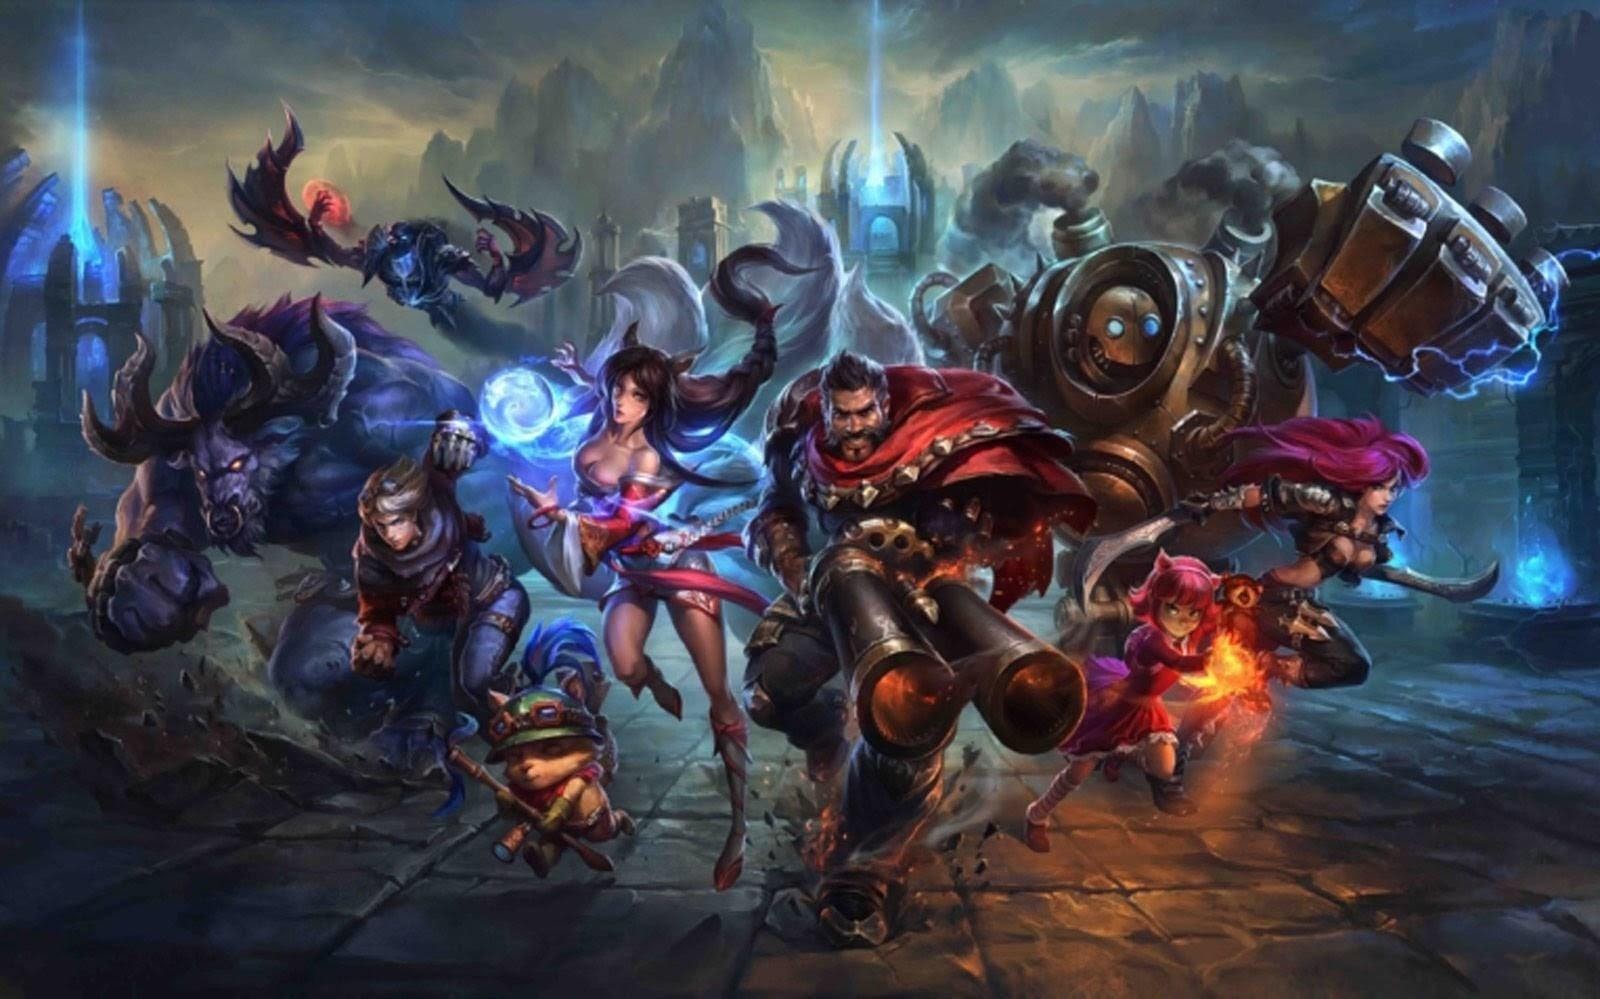 Learn How to Watch the LoL World Championship Online